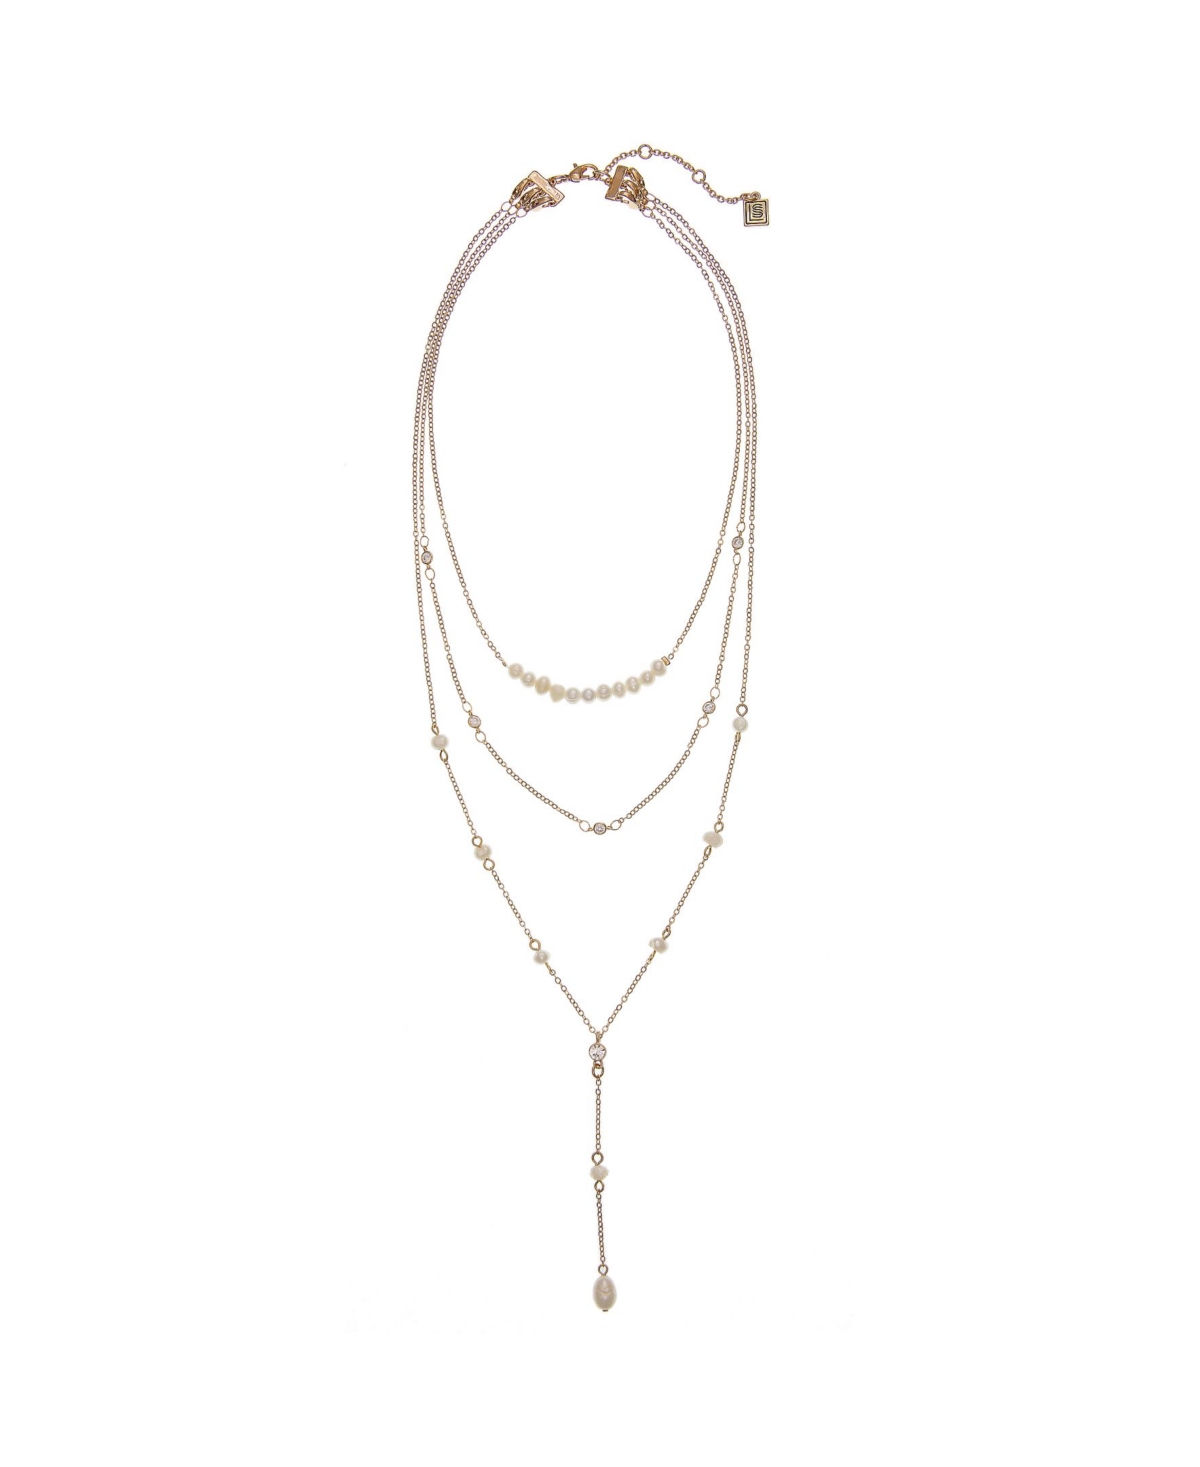 Fresh Water Imitation Pearls Convertible Necklace - Gold-tone